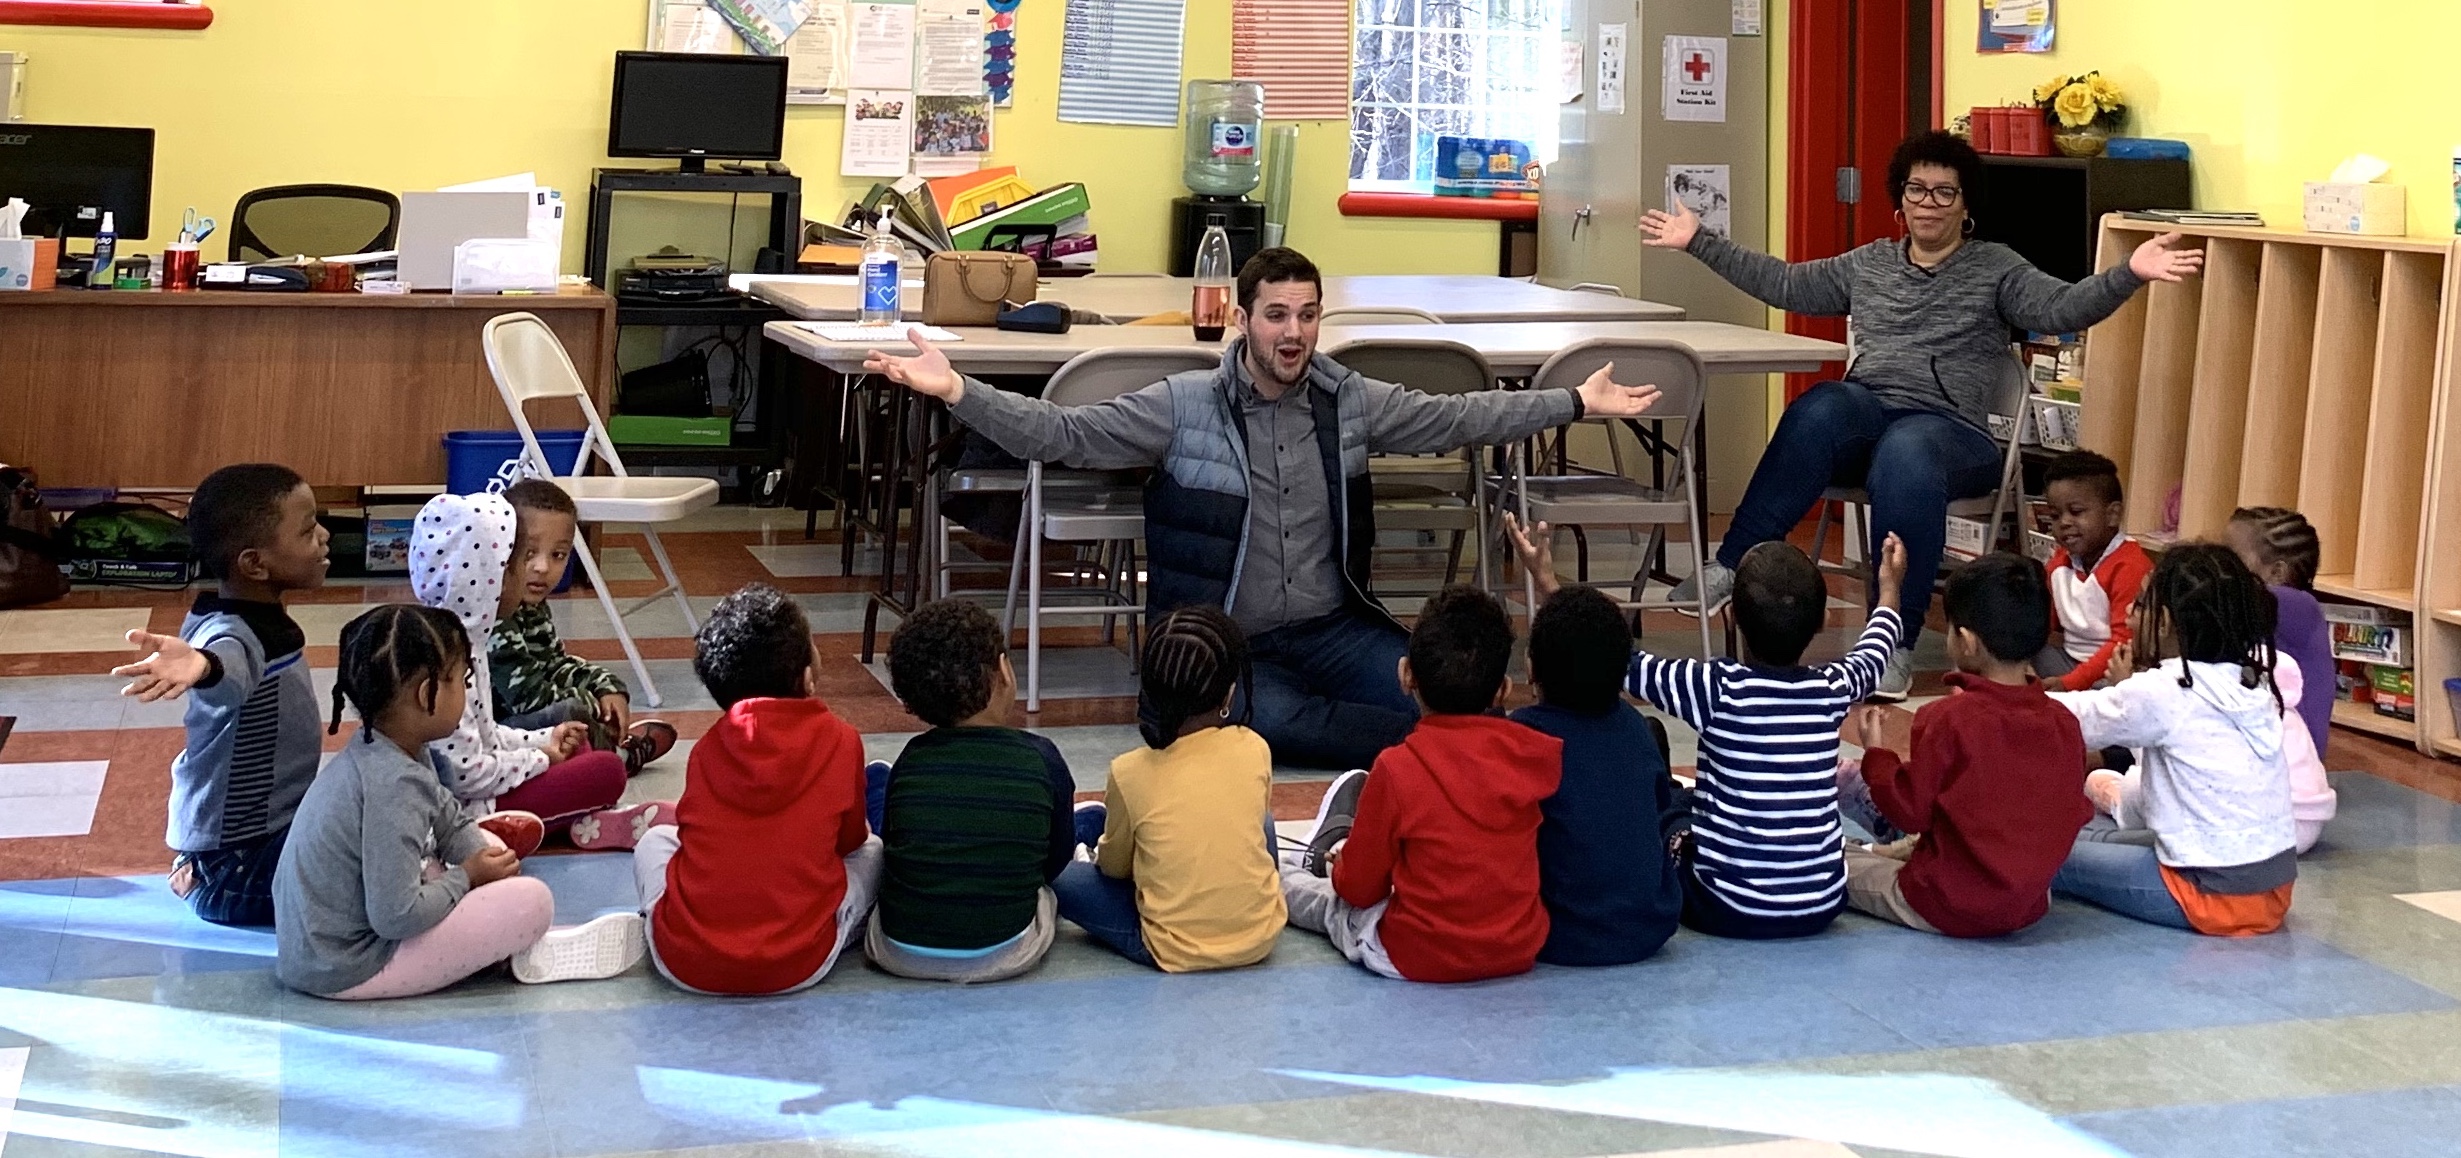 Wesley teaches an early childhood music class for the Tapestry Music Program